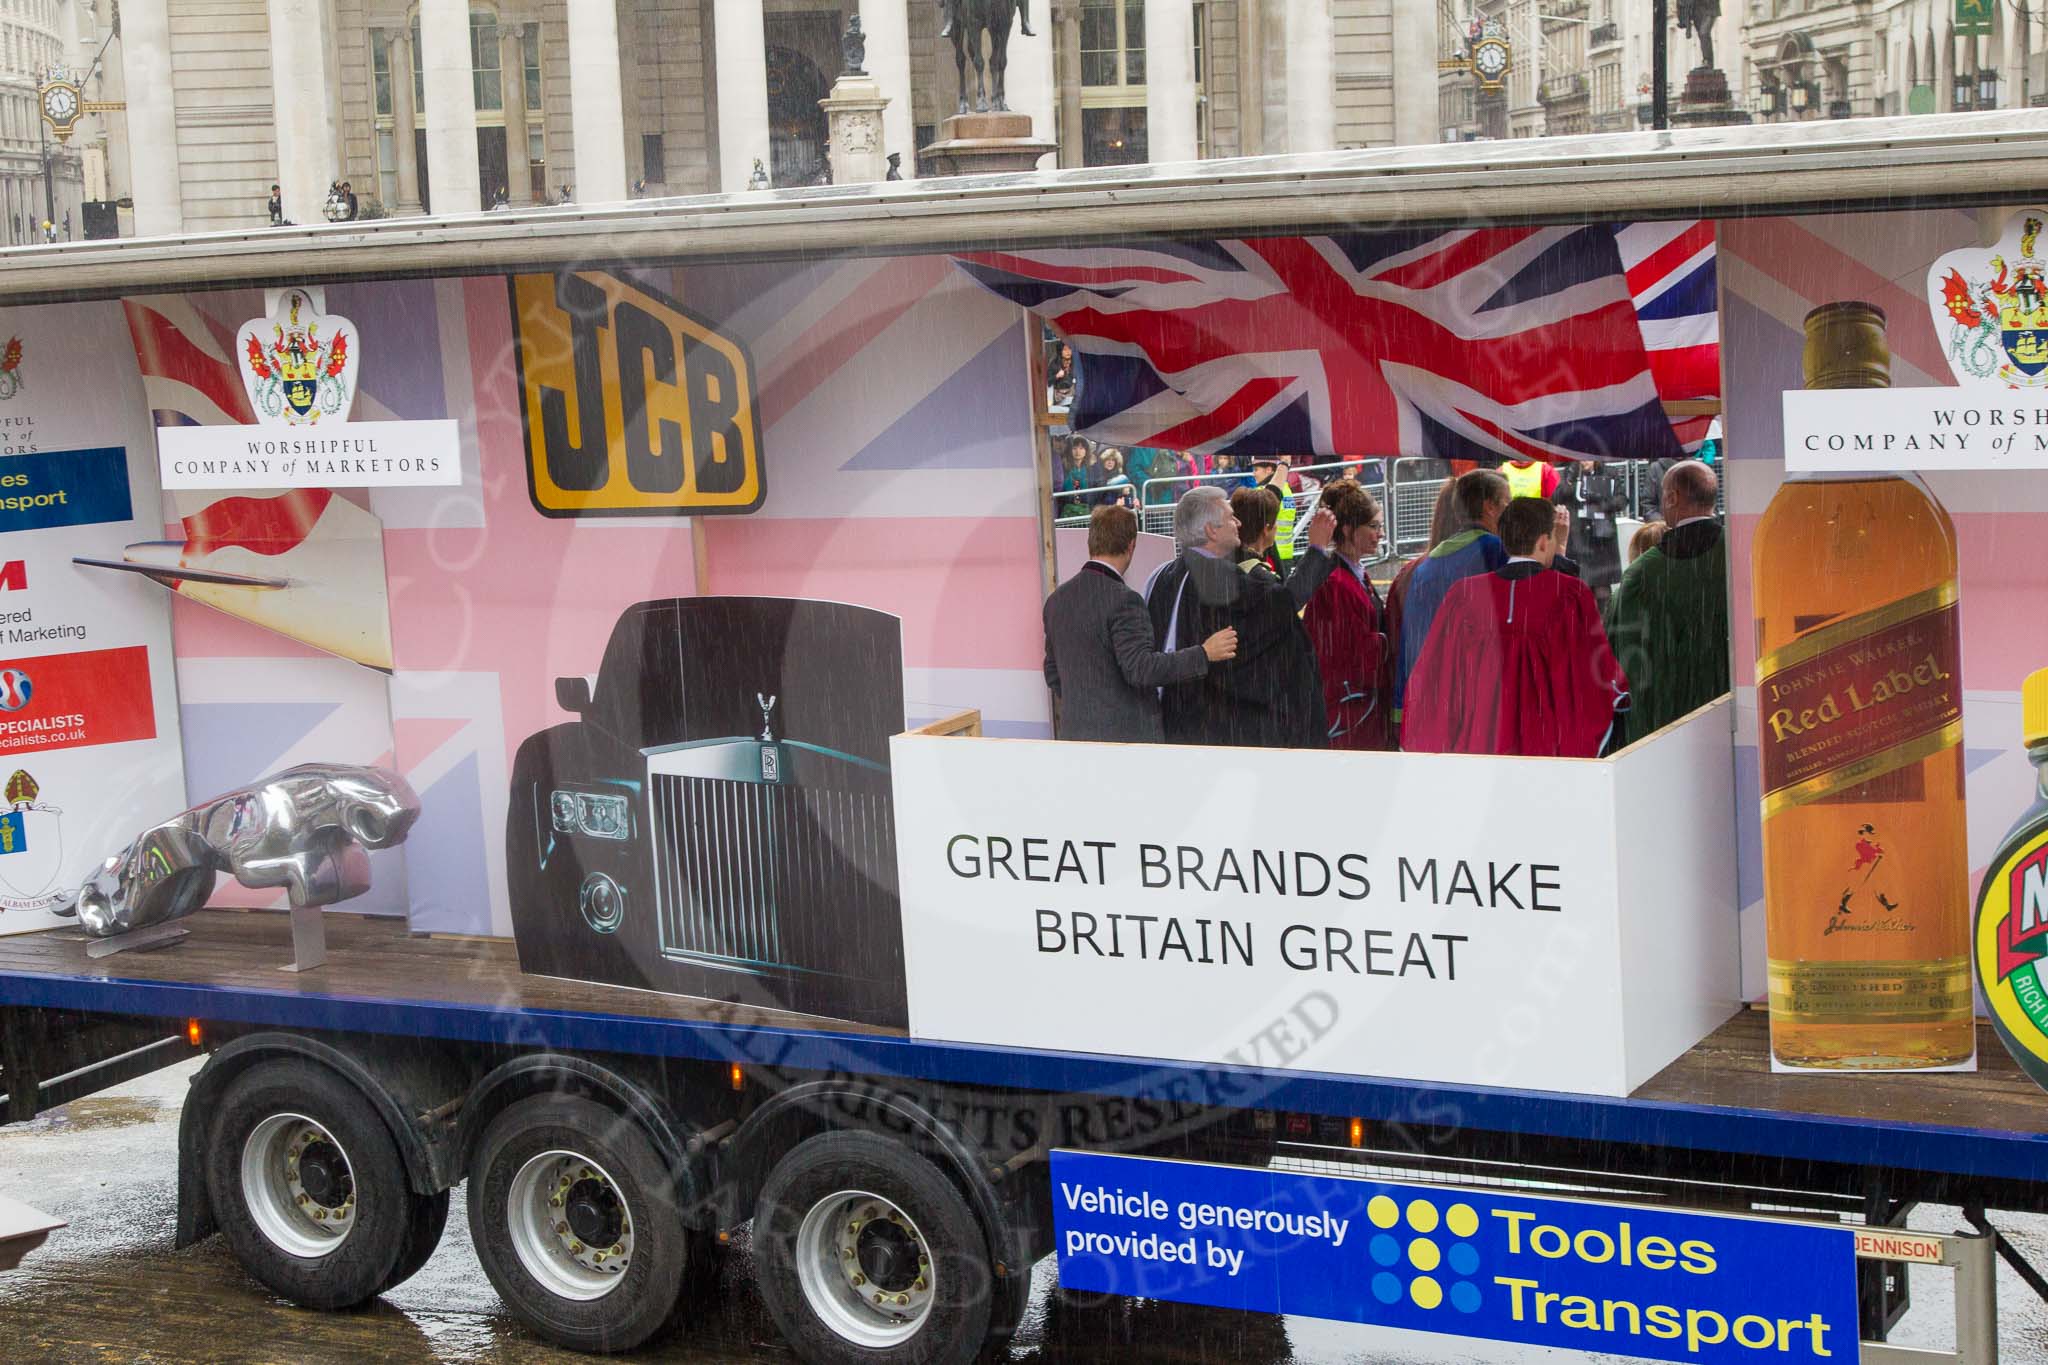 Lord Mayor's Show 2013: 49-Worshipful Company of Marketors-Their theme this year is  'Great Brands make Britain Great'..
Press stand opposite Mansion House, City of London,
London,
Greater London,
United Kingdom,
on 09 November 2013 at 11:28, image #654